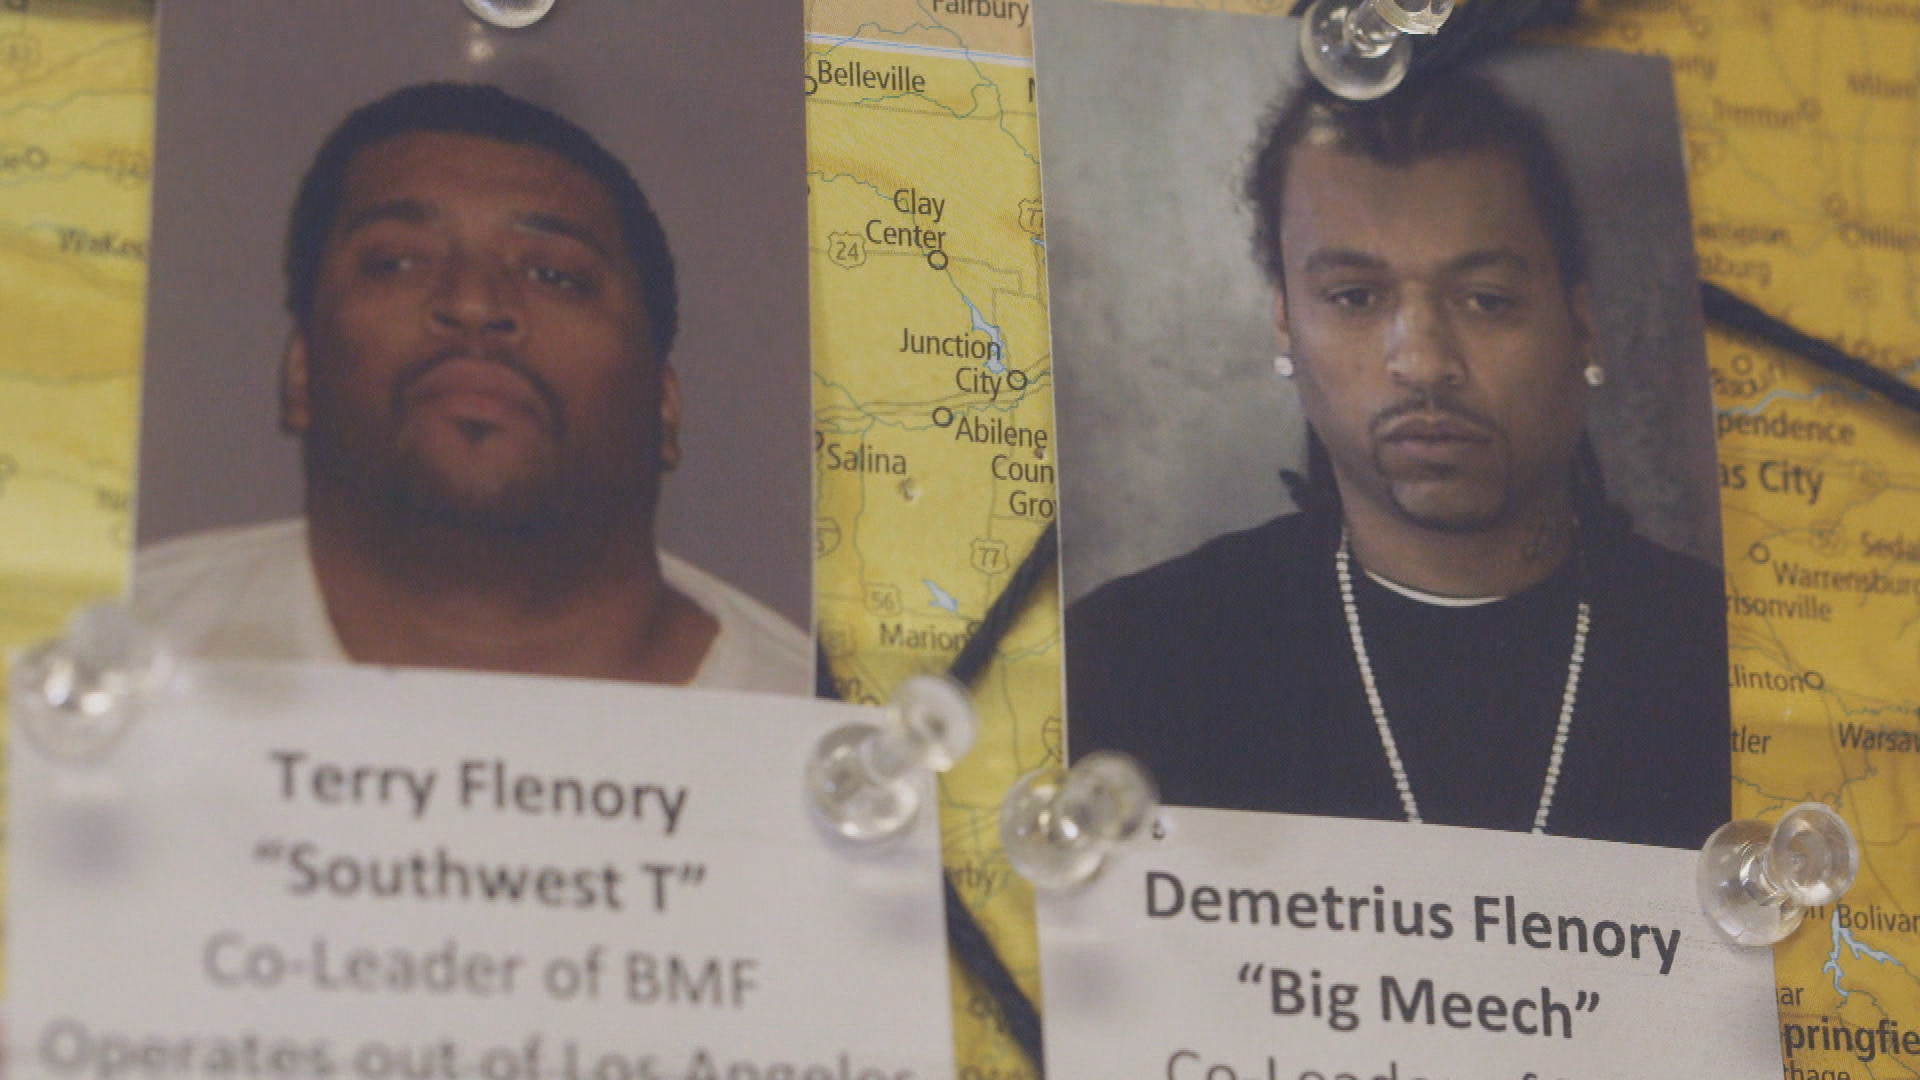 Mug shots of Terry Flenory and his brother Demetrius